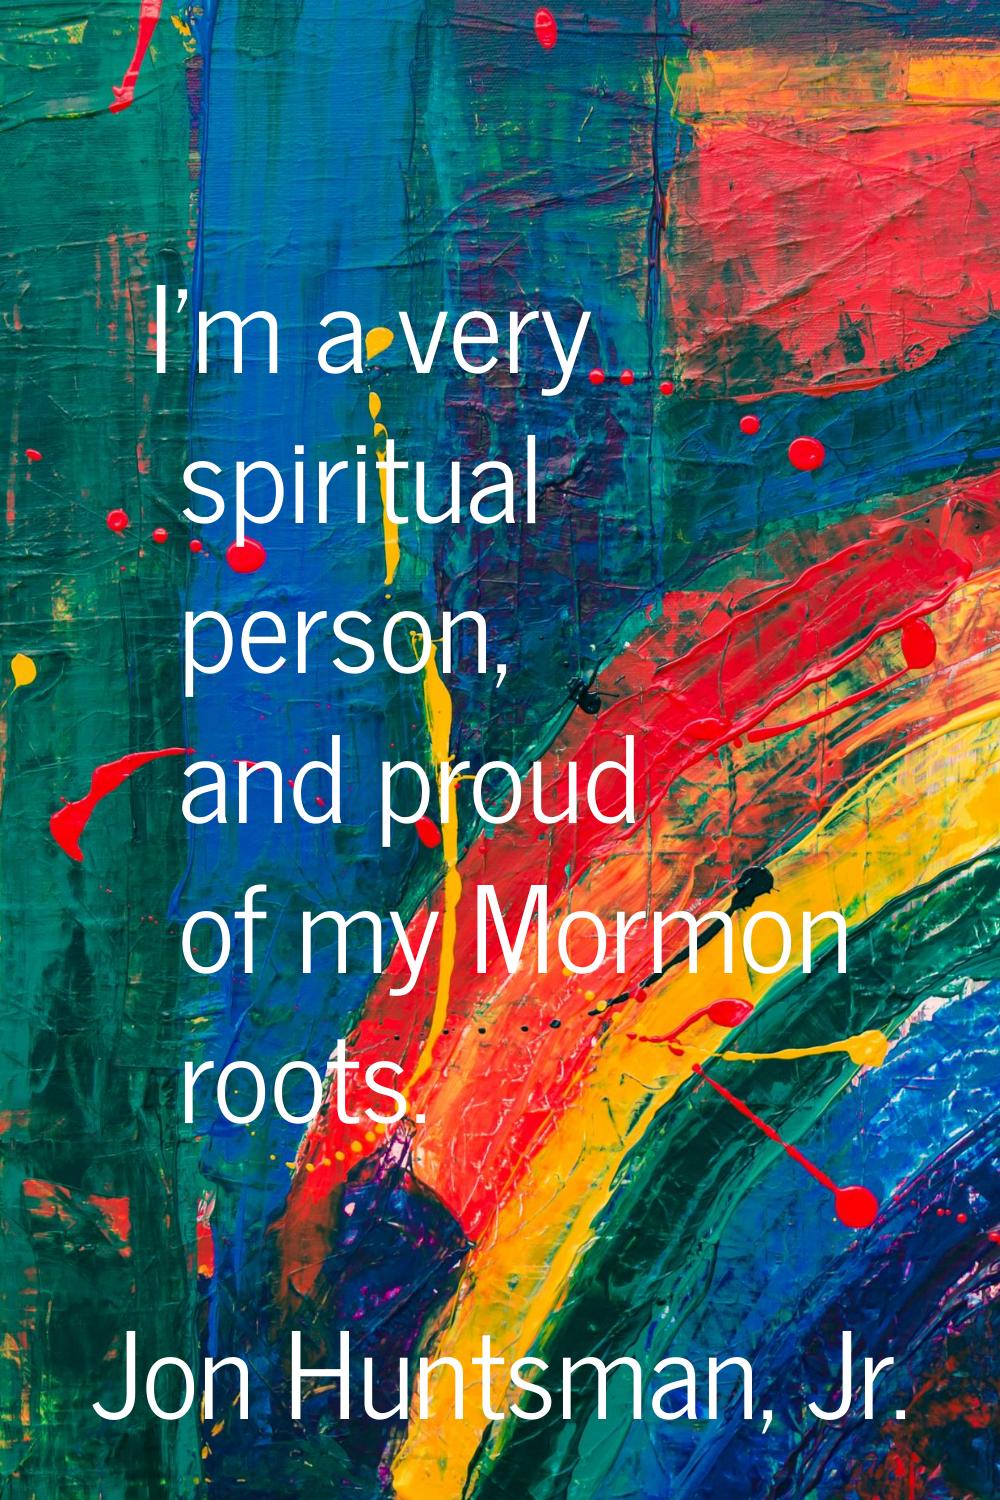 I'm a very spiritual person, and proud of my Mormon roots.